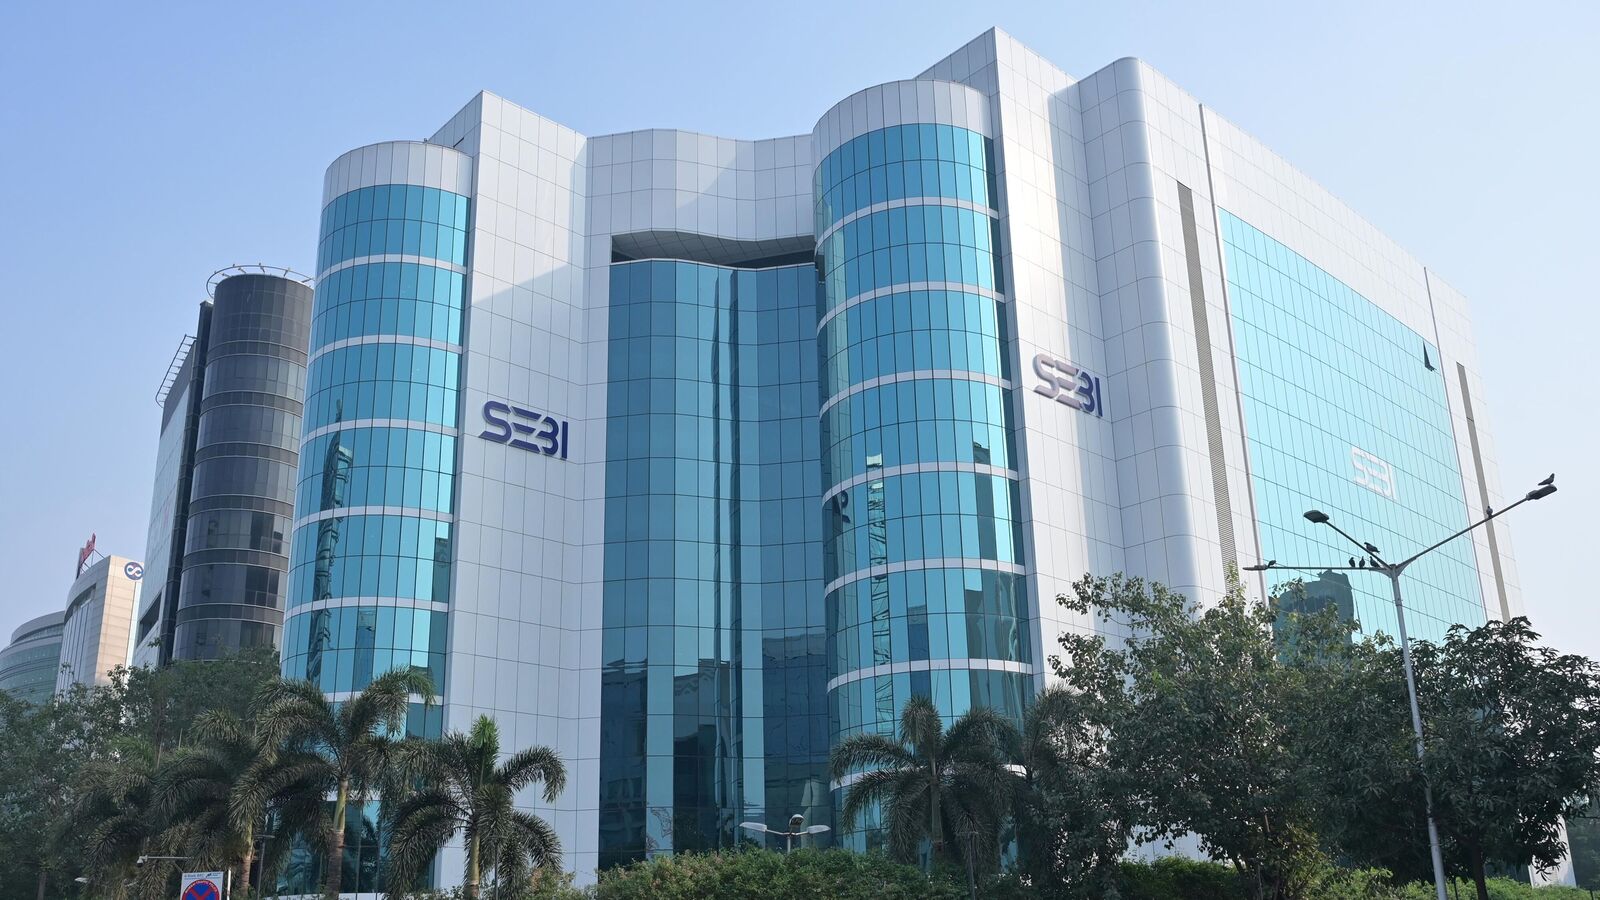 Sebi relaxes draconian KYC norms to simplify risk management framework. Details here